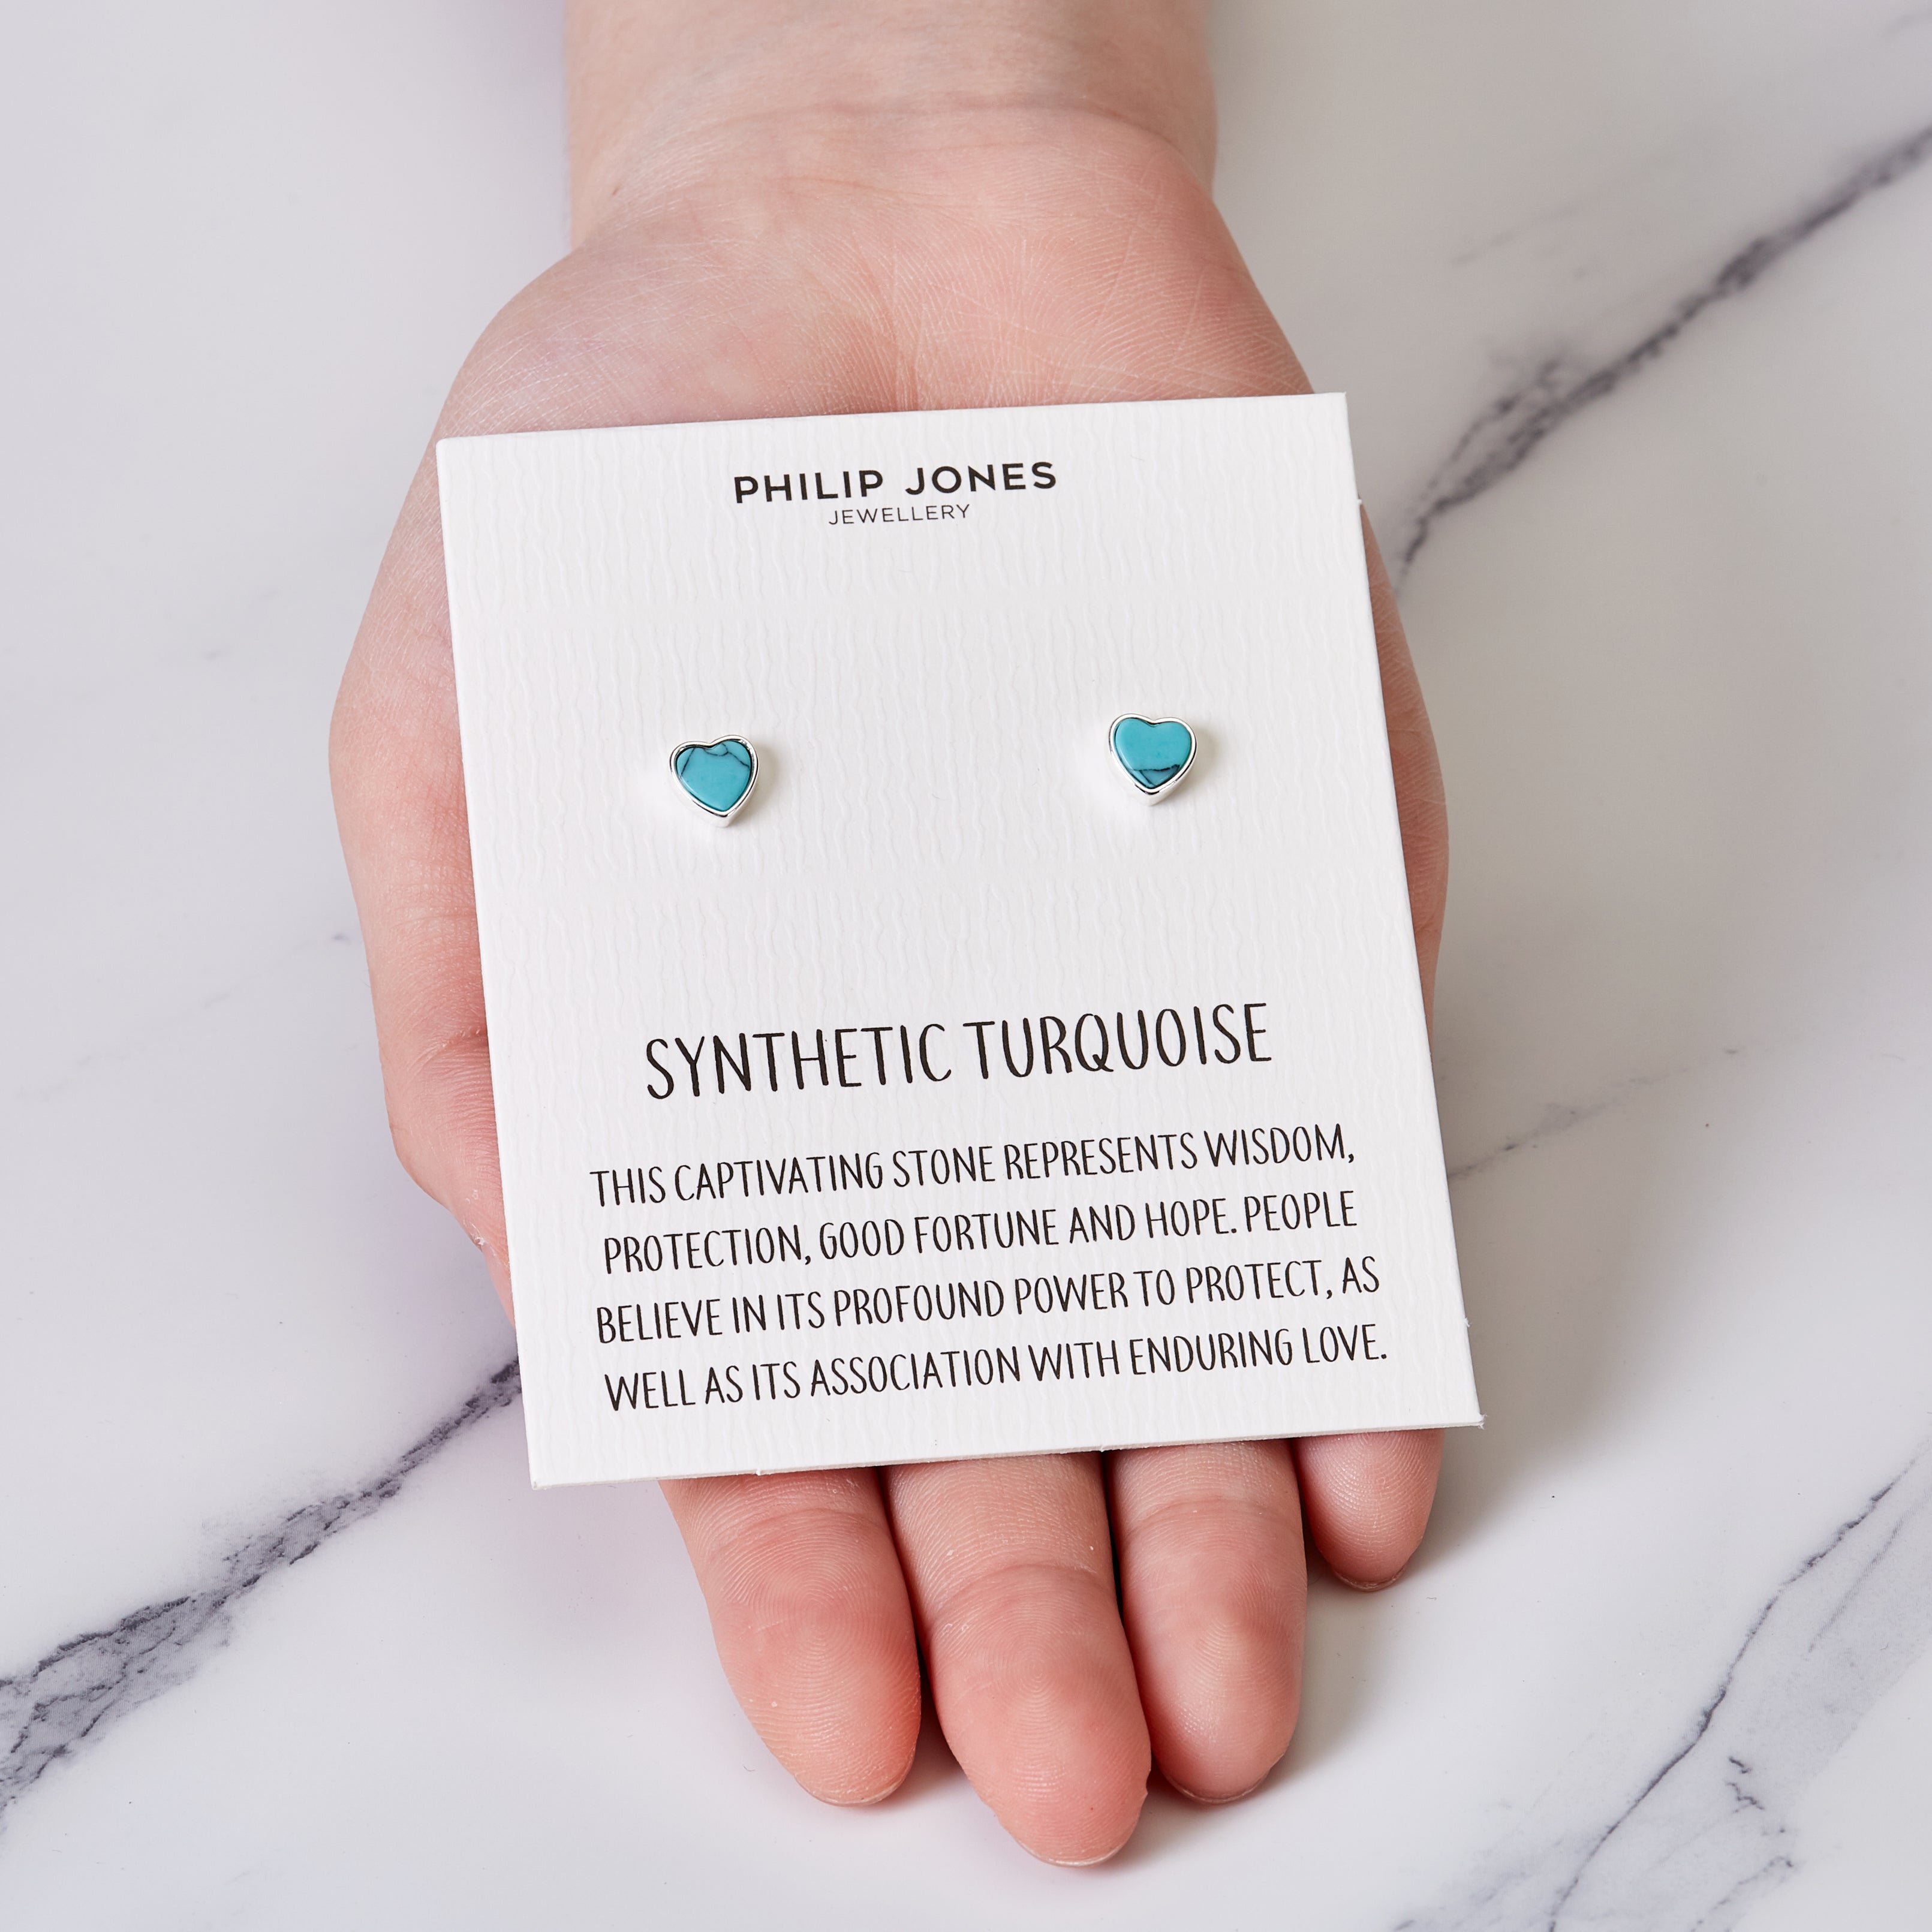 Synthetic Turquoise Heart Stud Earrings with Quote Card